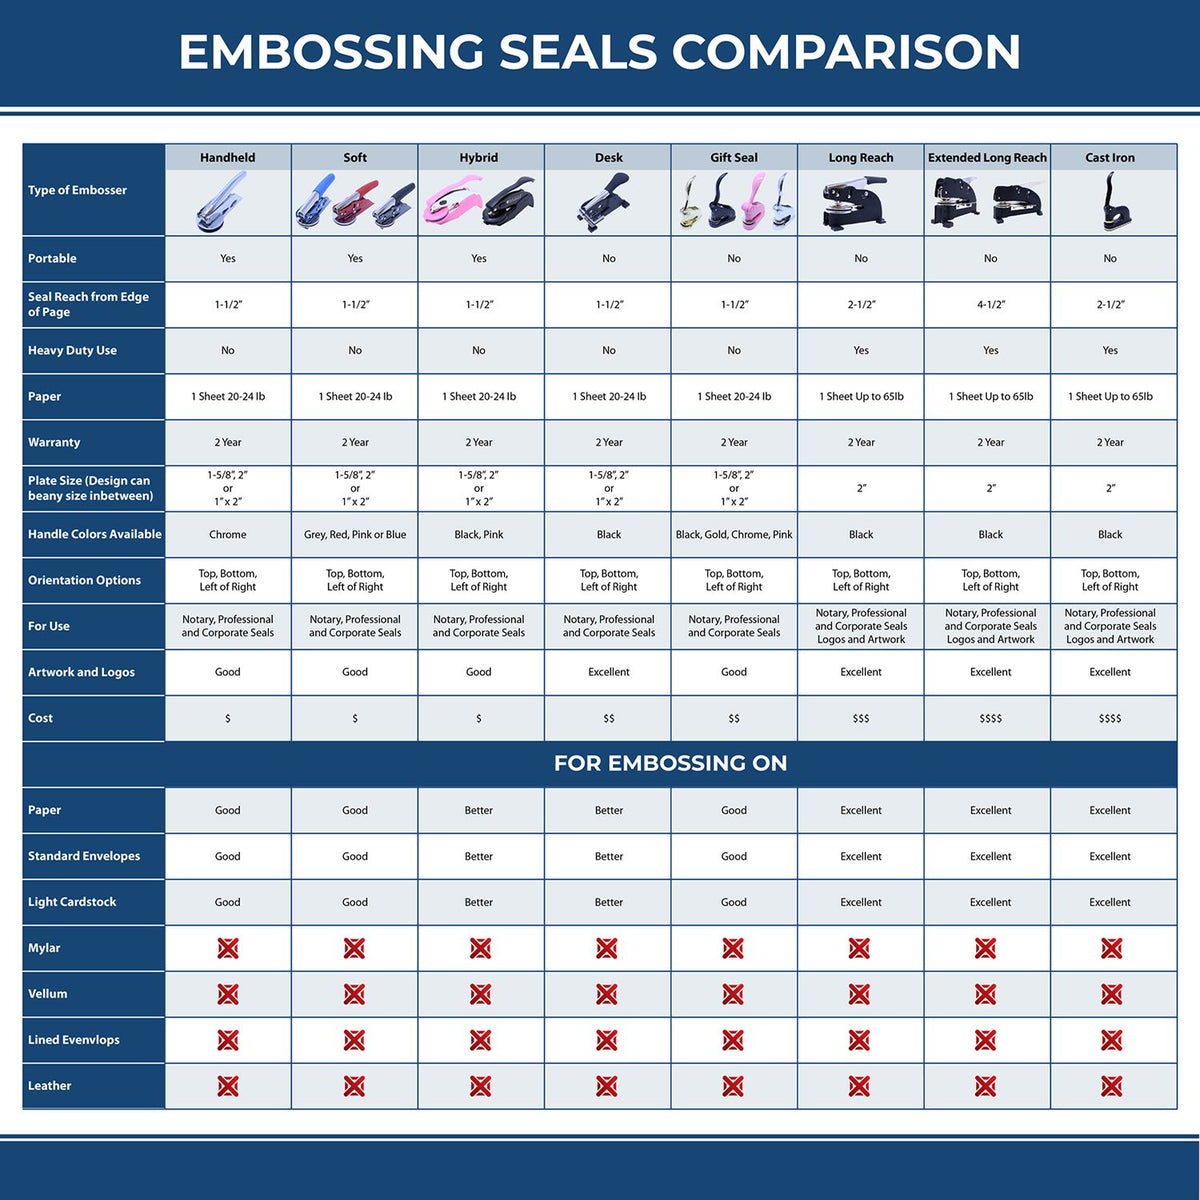 A comparison chart for the different types of mount models available for the Extended Long Reach New Jersey Architect Seal Embosser.